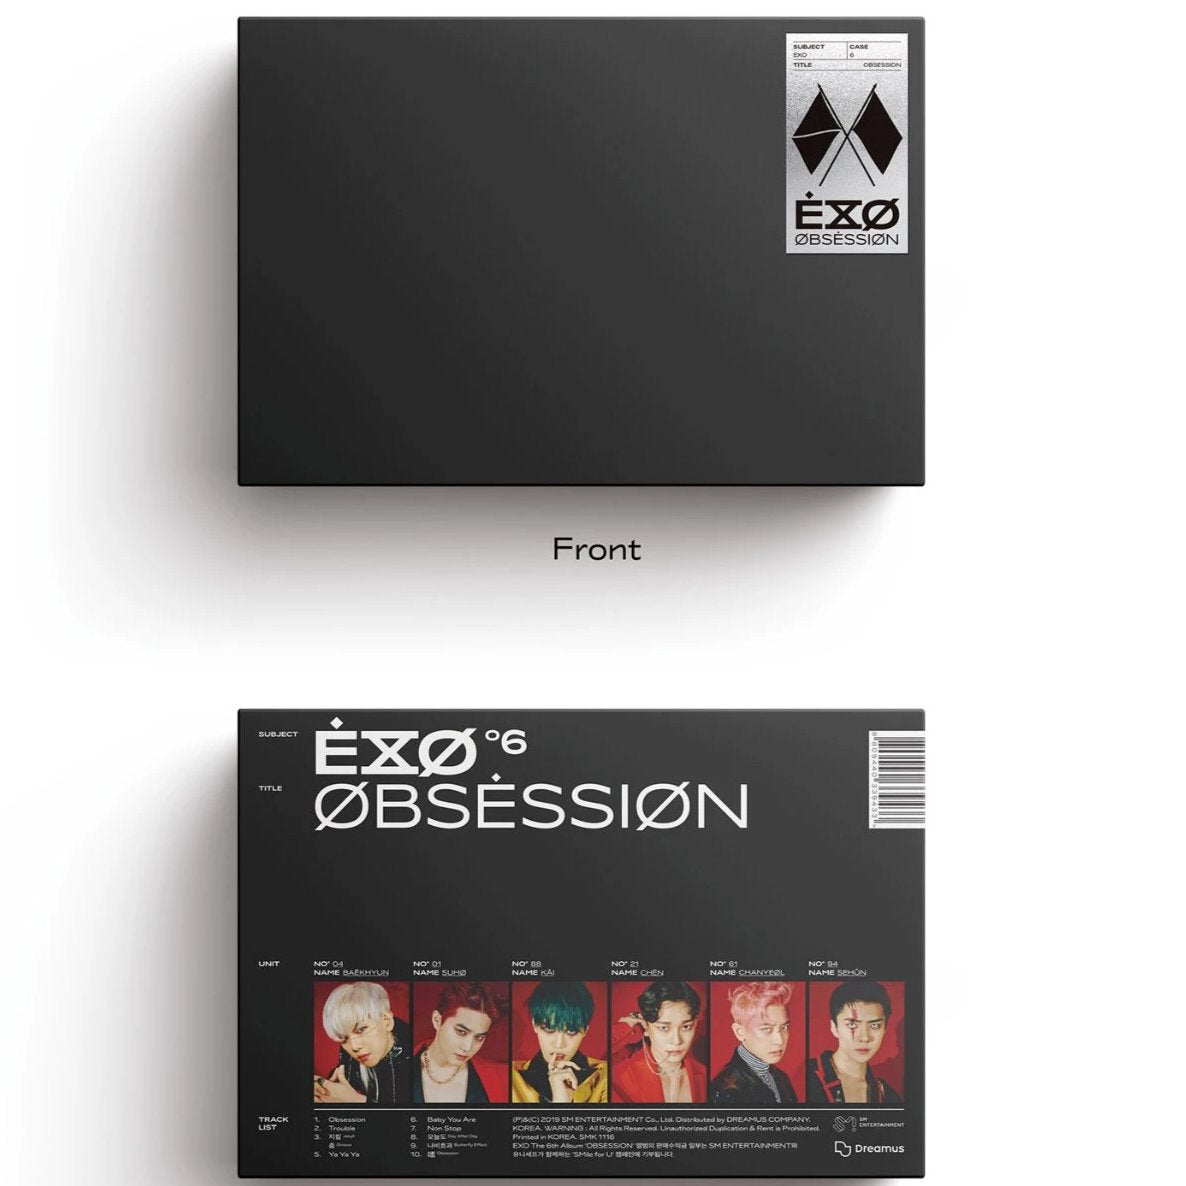 [EXO] Obsession